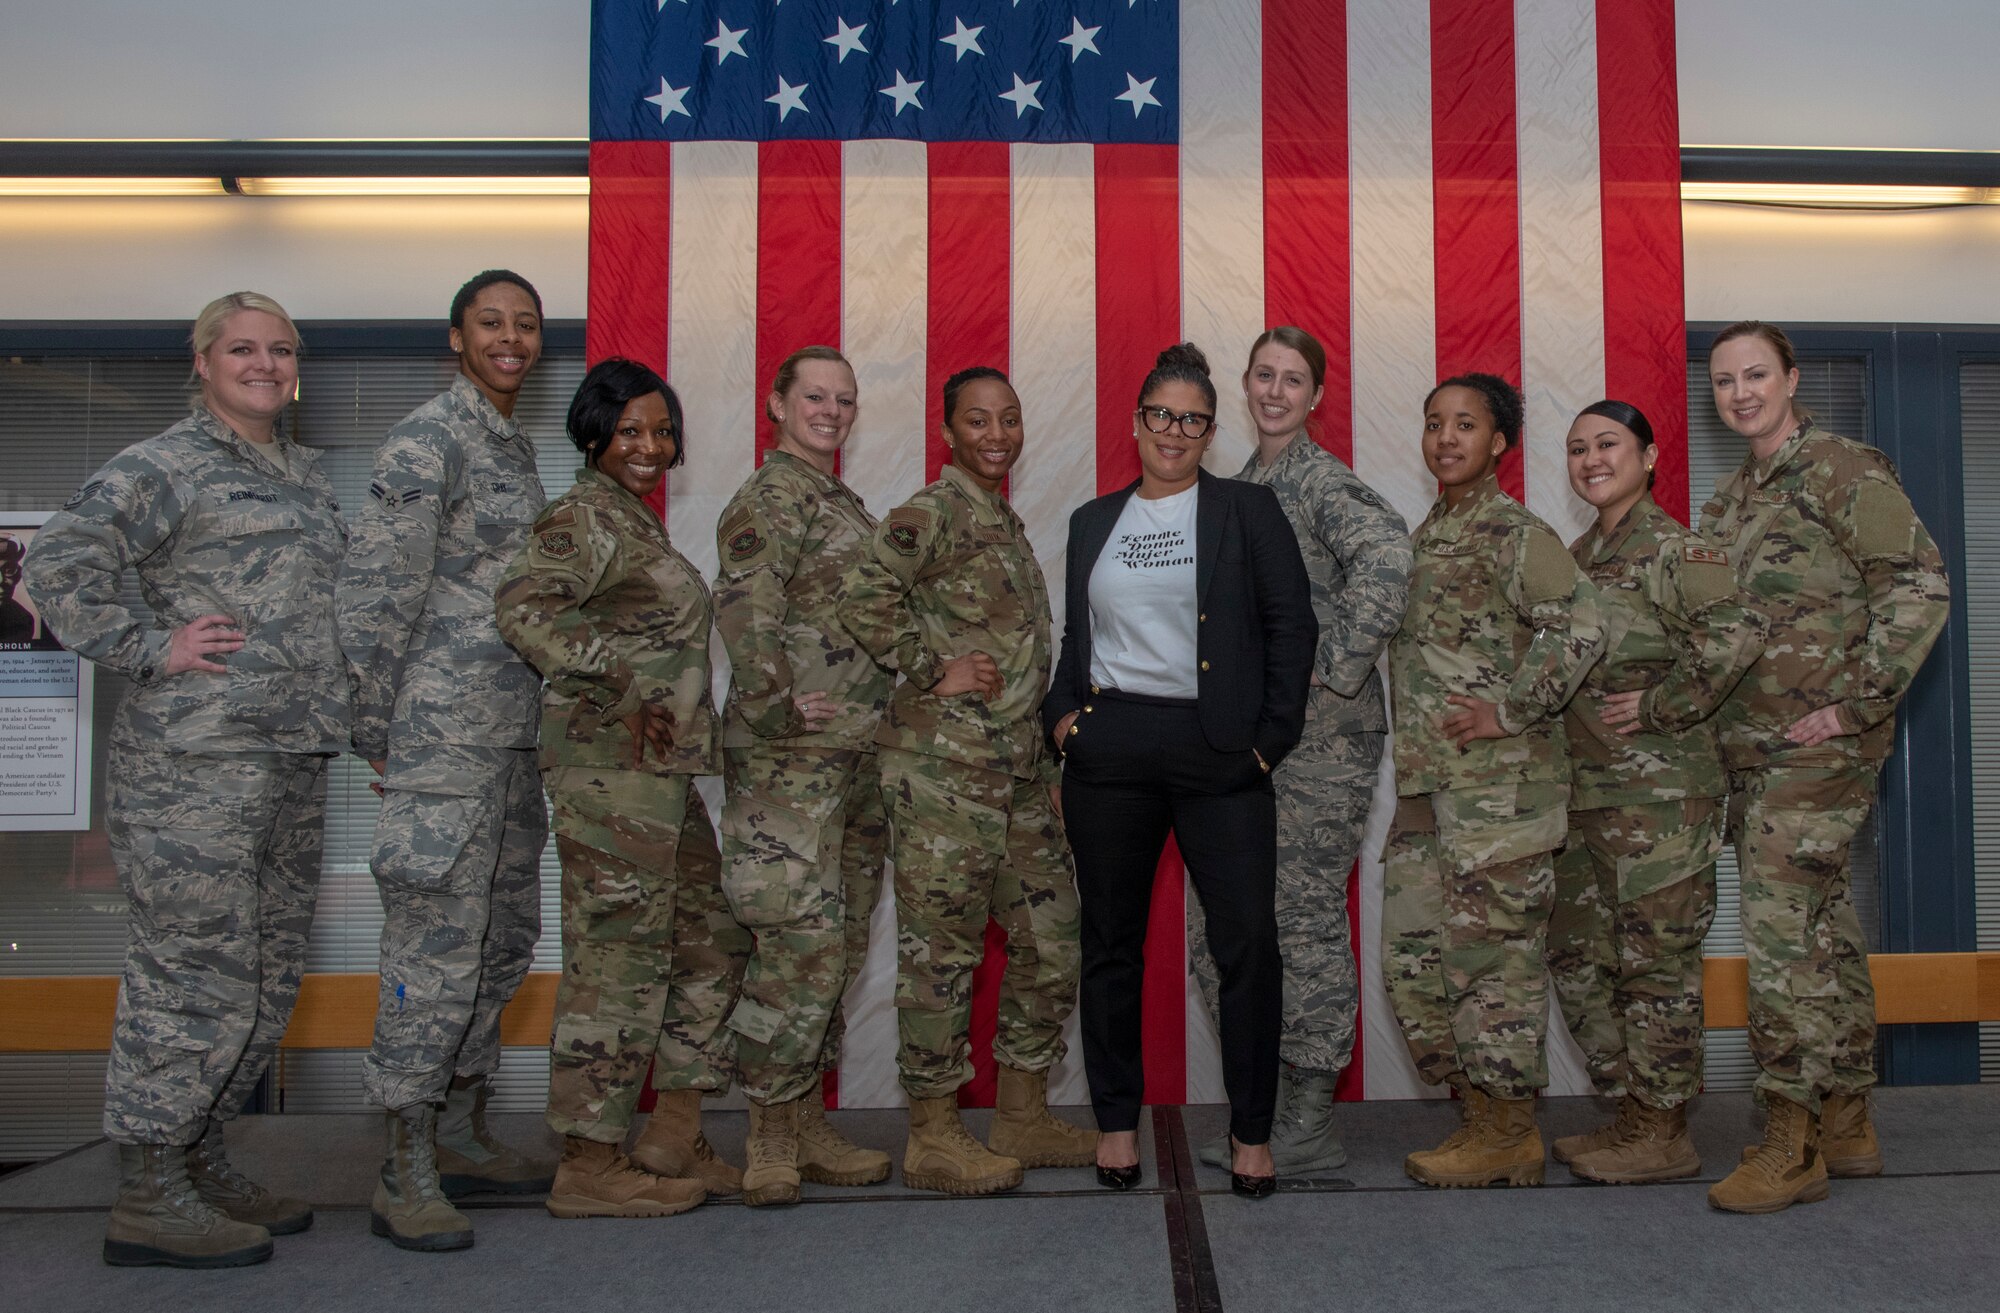 Members of the Women Inspiring the Next Generation’s Success committee pause to take a photo before the start of the Women’s History Month social gathering, March 20, 2019, at Travis Air Force Base, California. Since 1987, the month of March has been designated to celebrate the historical and ongoing achievements and contributions of women. The WINGS association was responsible for organizing the event which included an exhibit highlighting extraordinary female heroes, and featured speakers prominent in the Travis community. (U.S. Air Force photo by Heide Couch)